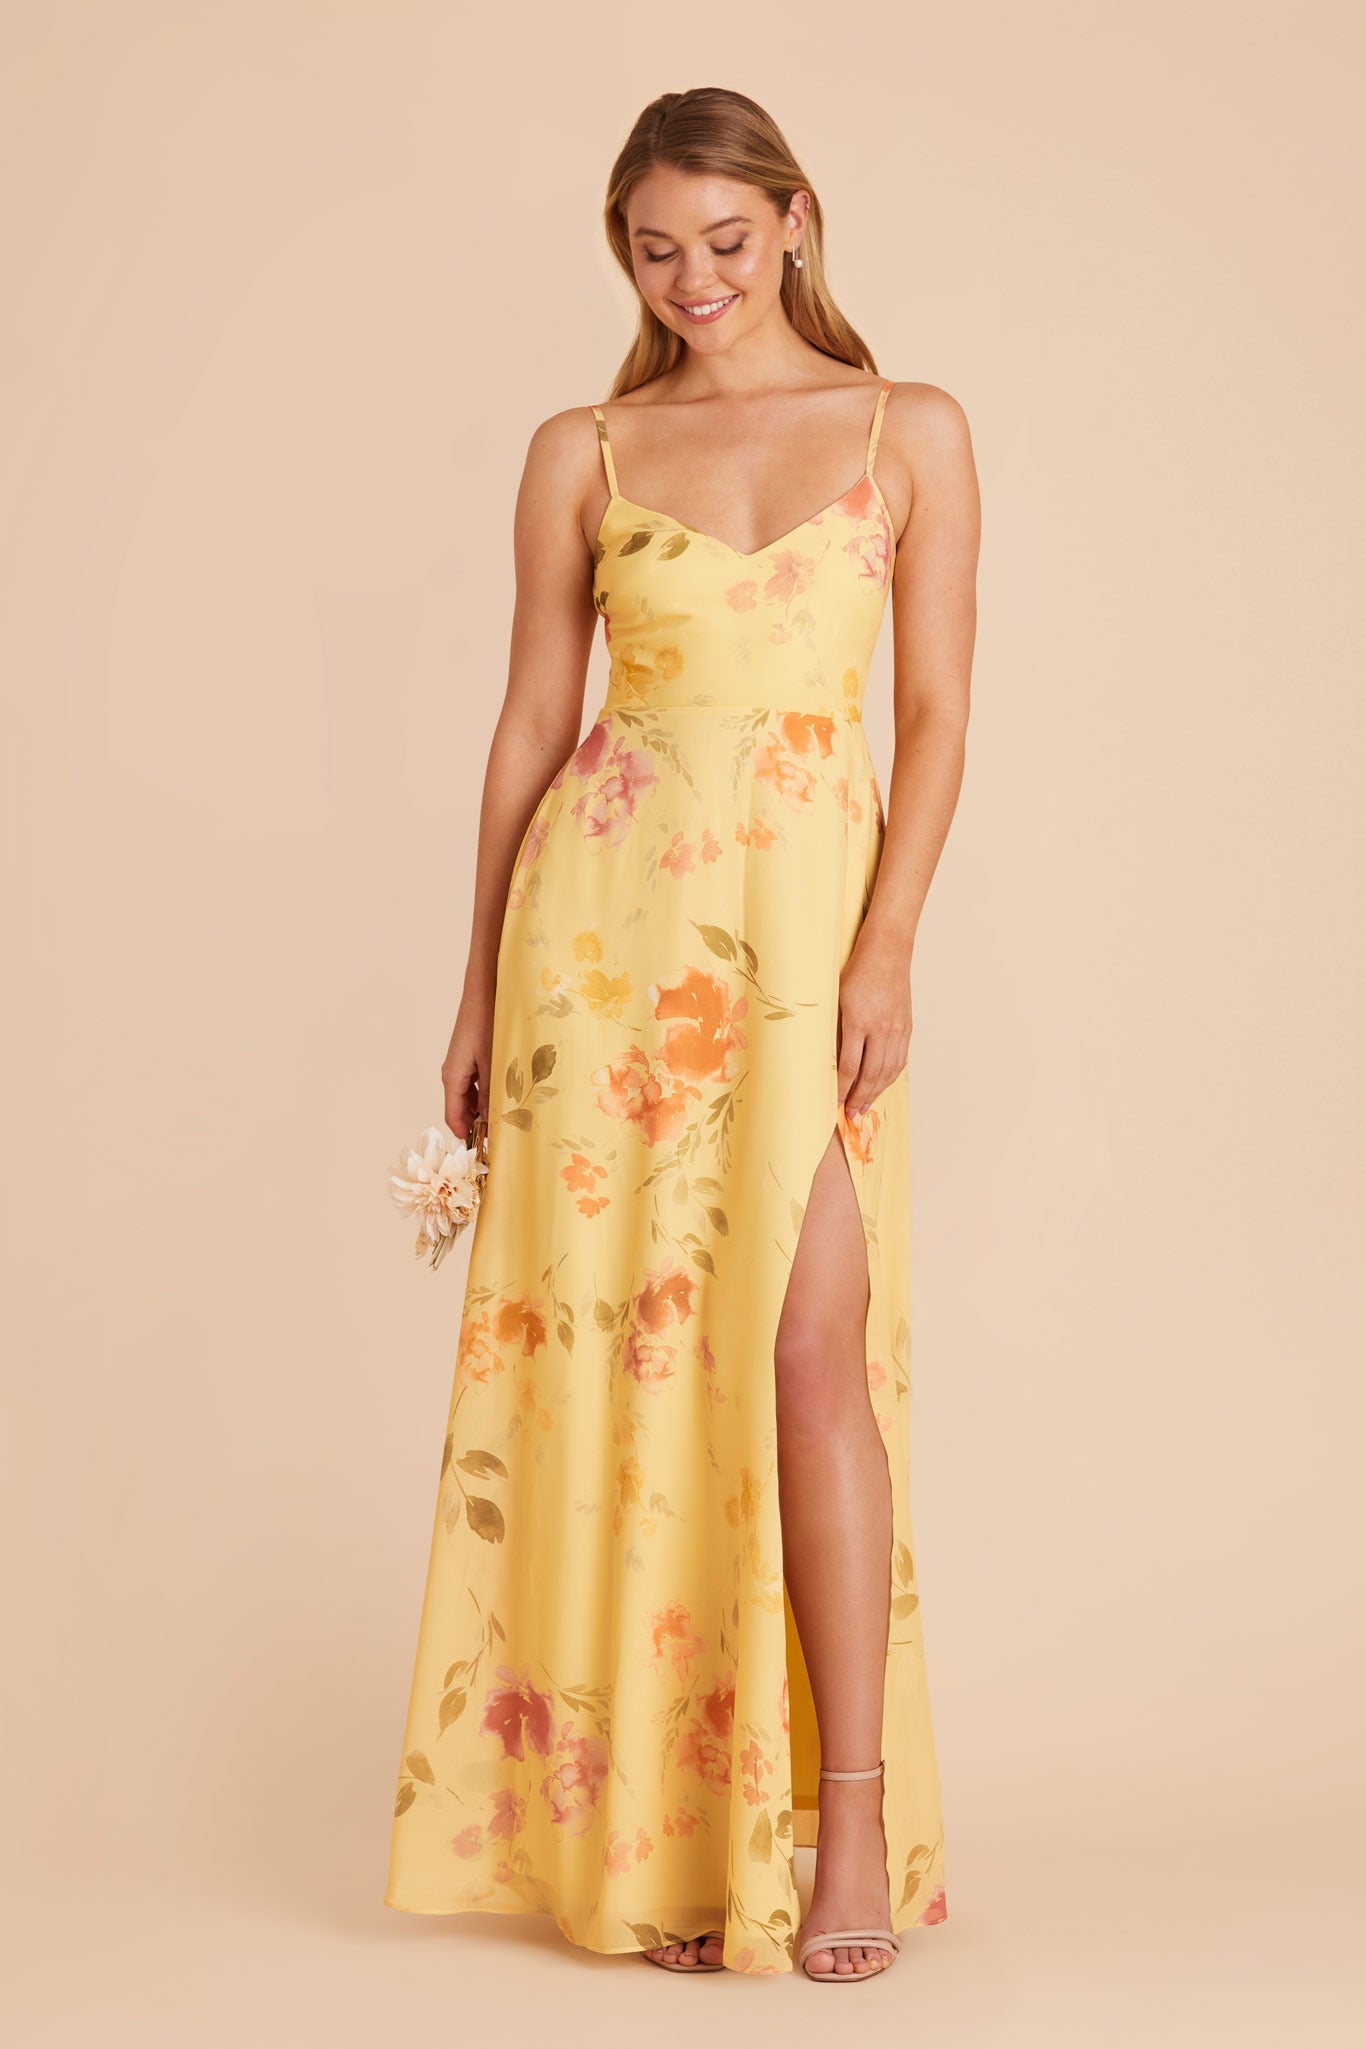 Pale Yellow Rococo Floral Devin Convertible Dress by Birdy Grey